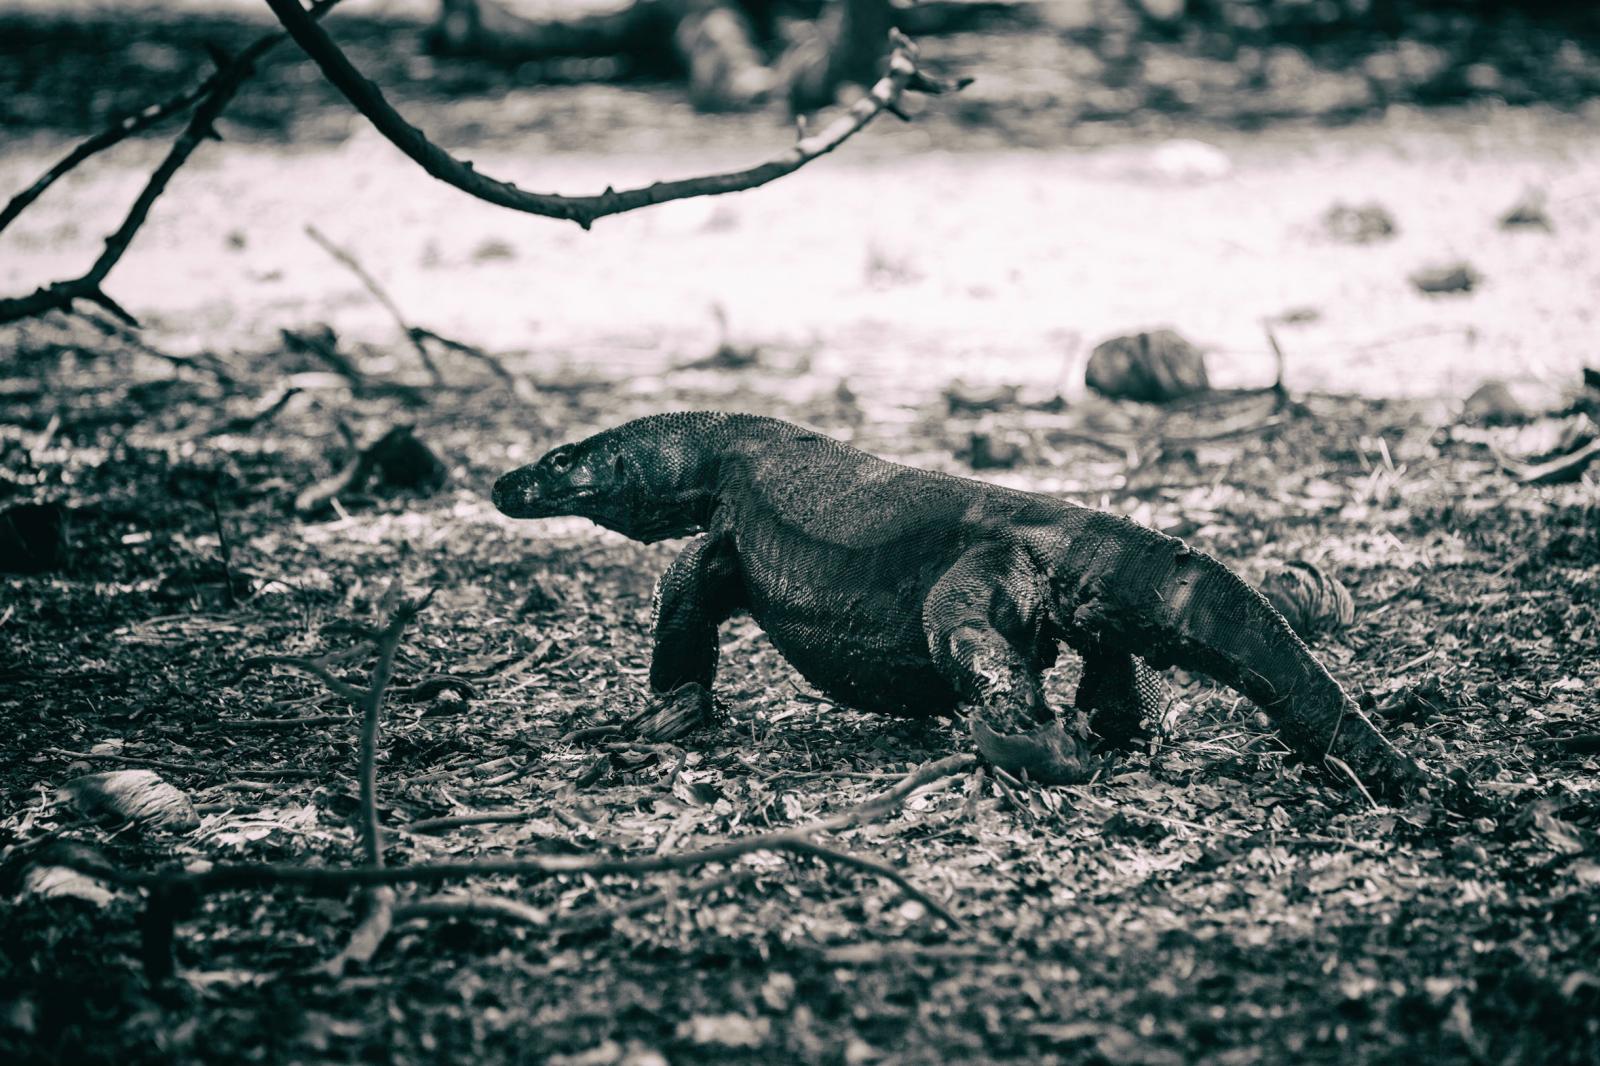 The Komodo Dragon is the bigges...3,000 dragons left in the wild.